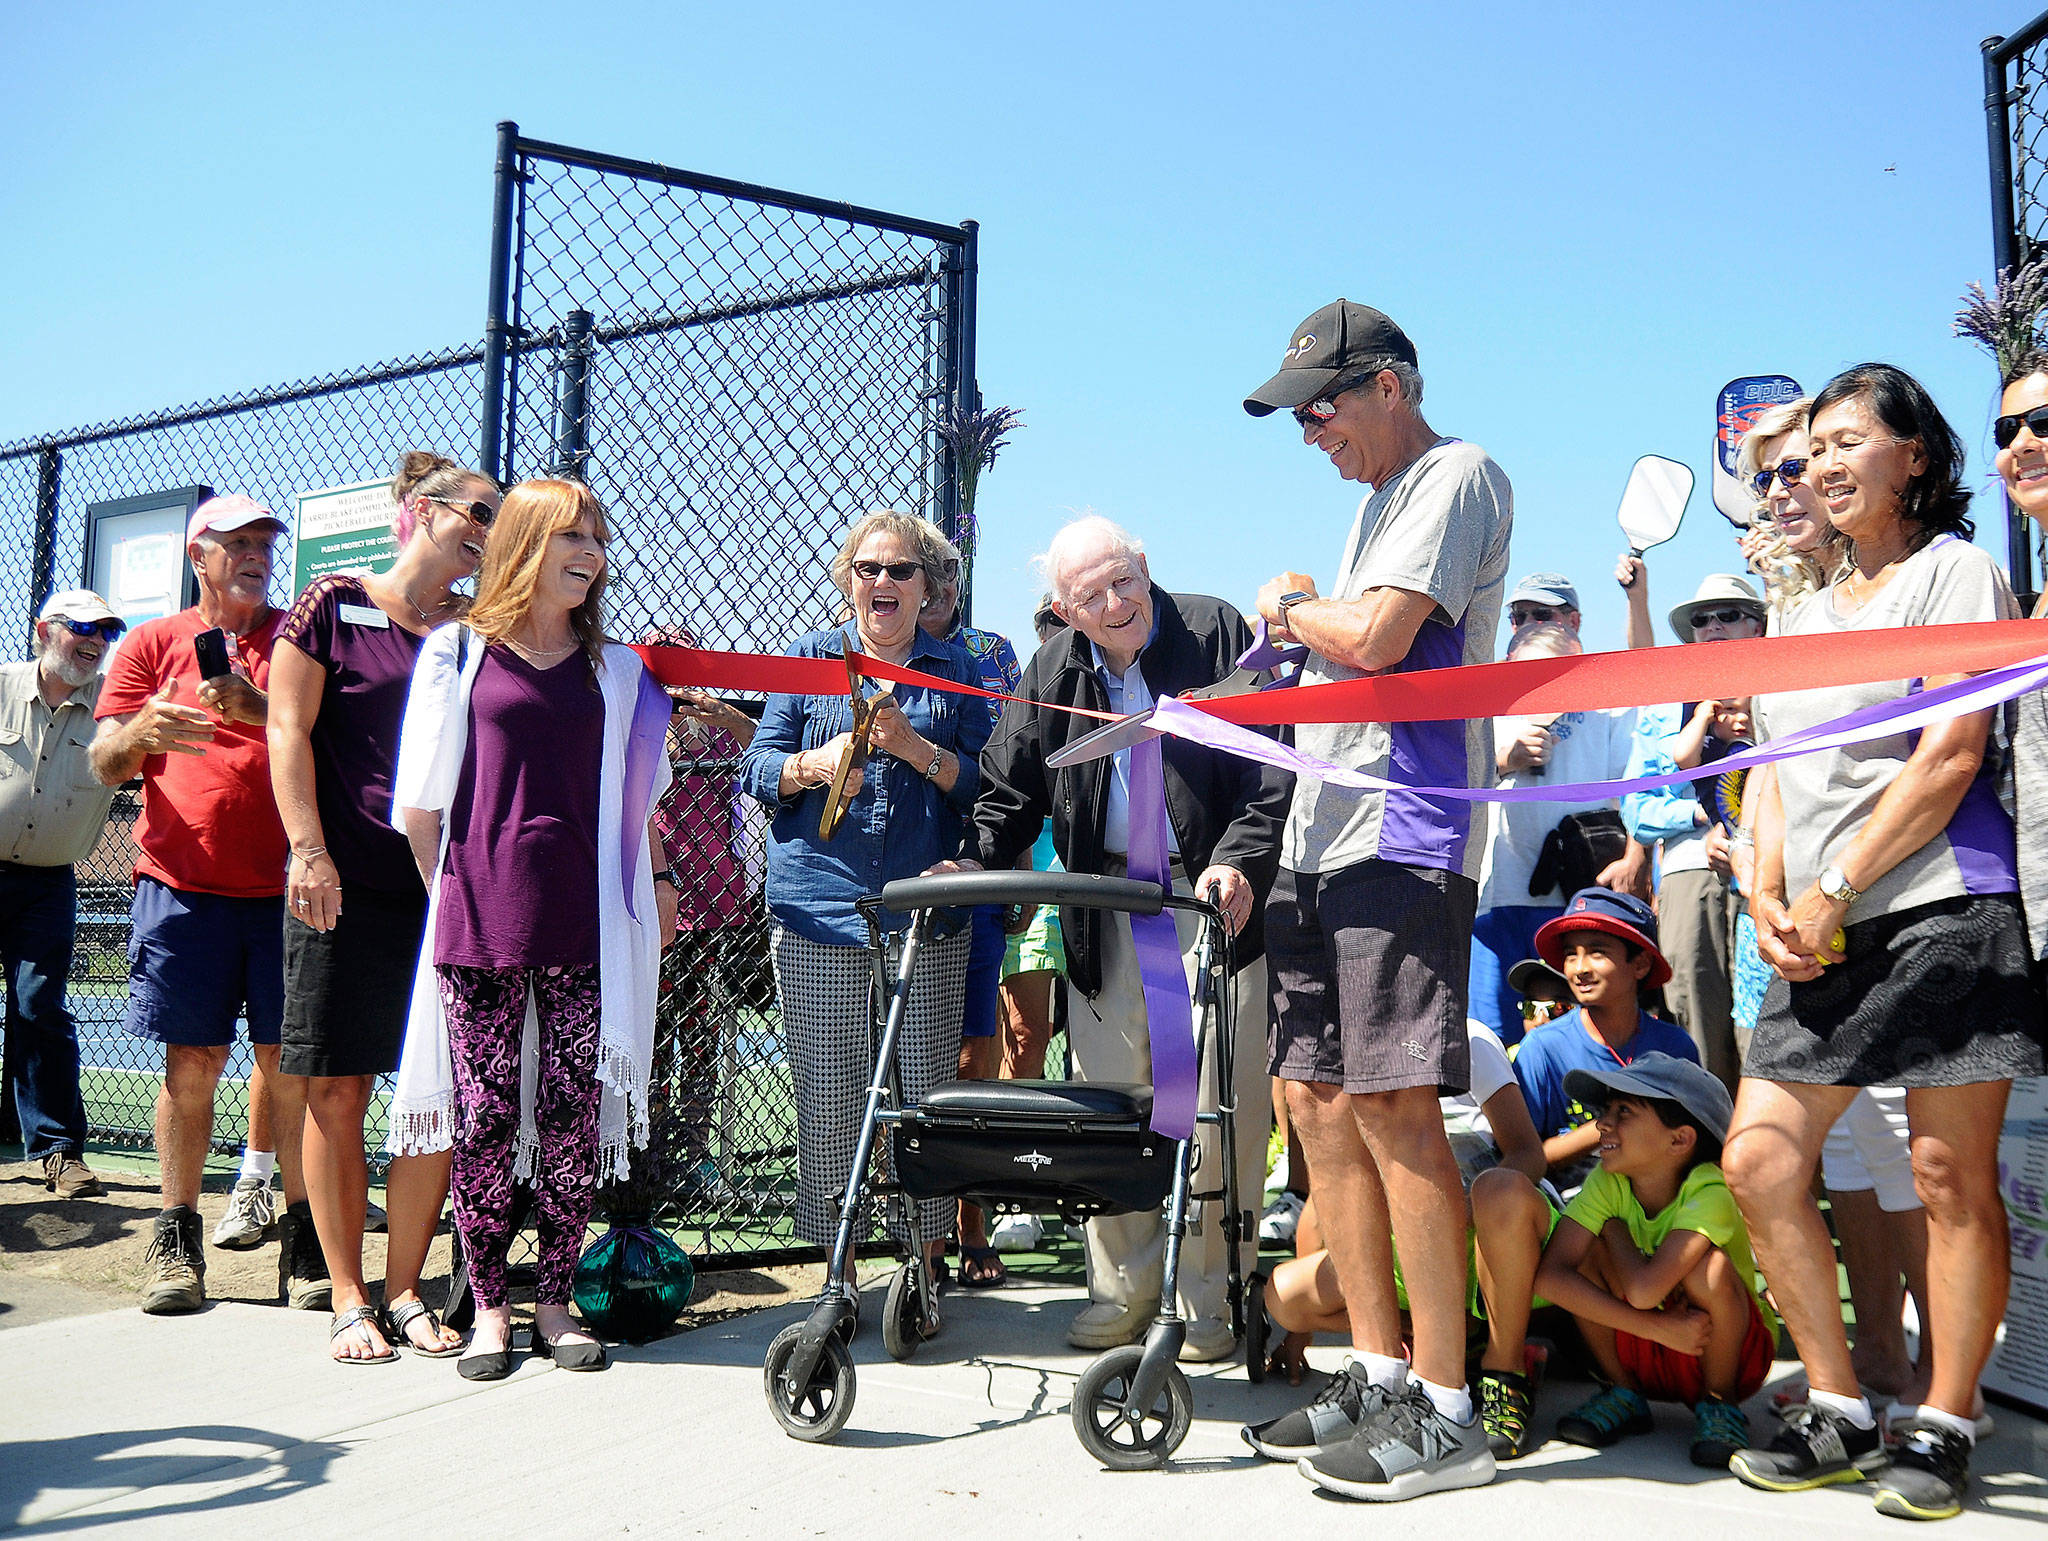 Sequim Picklers and other pickleball advocates celebrate the grand opening of courts at Carrie Blake Community Park last week. Pictured, from left, are: Nancy Merrigan, Sequim-Dungeness Chamber of Commerce board member, City of Sequim councilor Candace Pratt; Barney McCallum, one of three originators of the sport of pickleball, and Charlie Pugh, vice president for the Sequim Picklers group. Sequim Gazette photo by Michael Dashiell